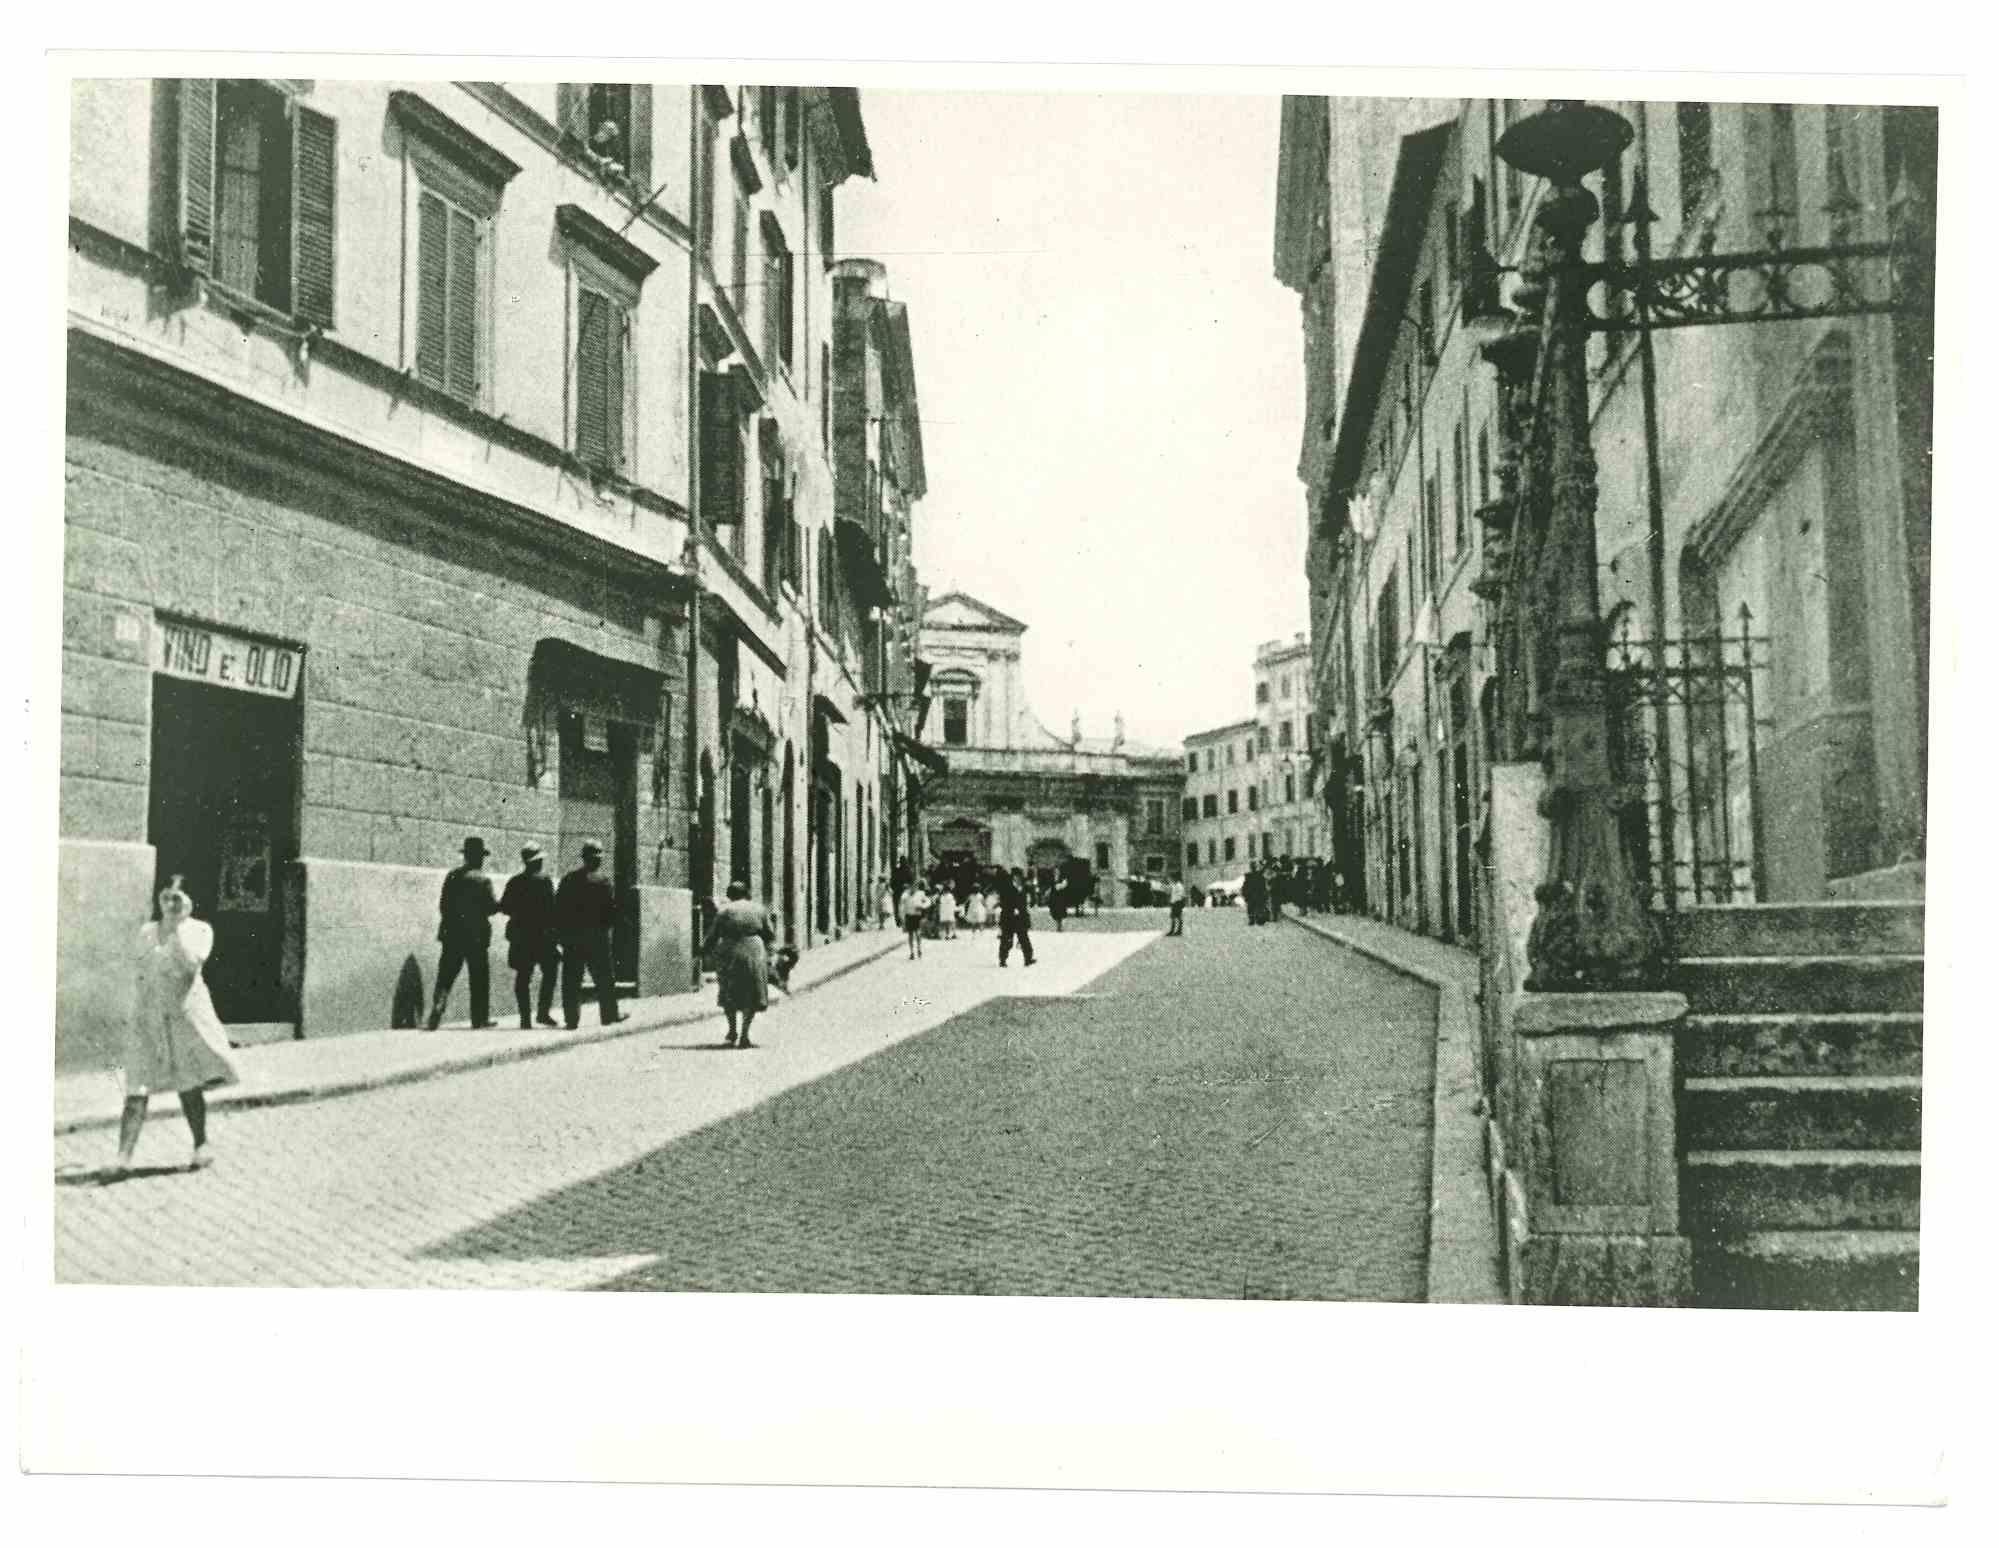 Unknown Landscape Photograph - View of Rome - Vintage Photograph - Early 20th Century